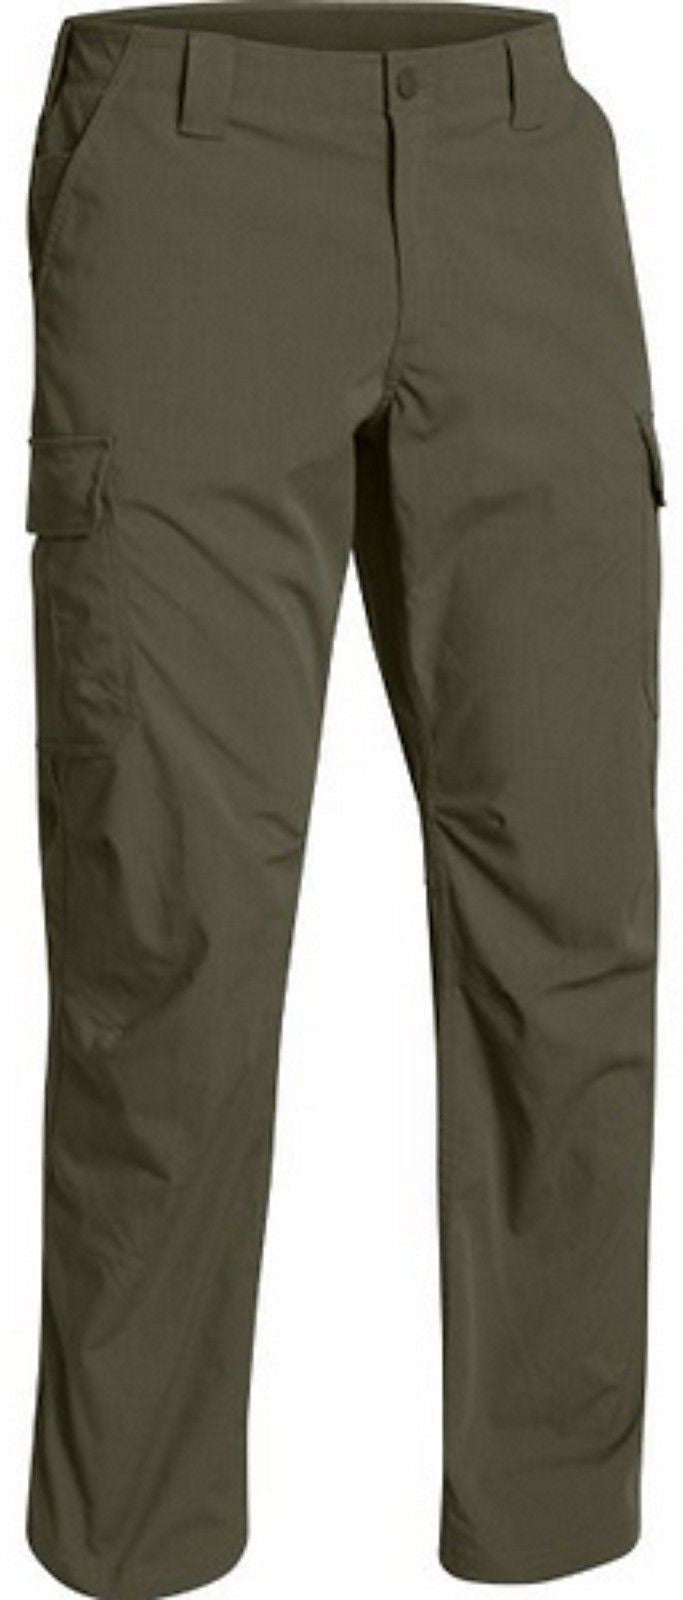 Under Armour Tactical Patrol Pants II - Conceal Carry Field Duty Cargo Pants